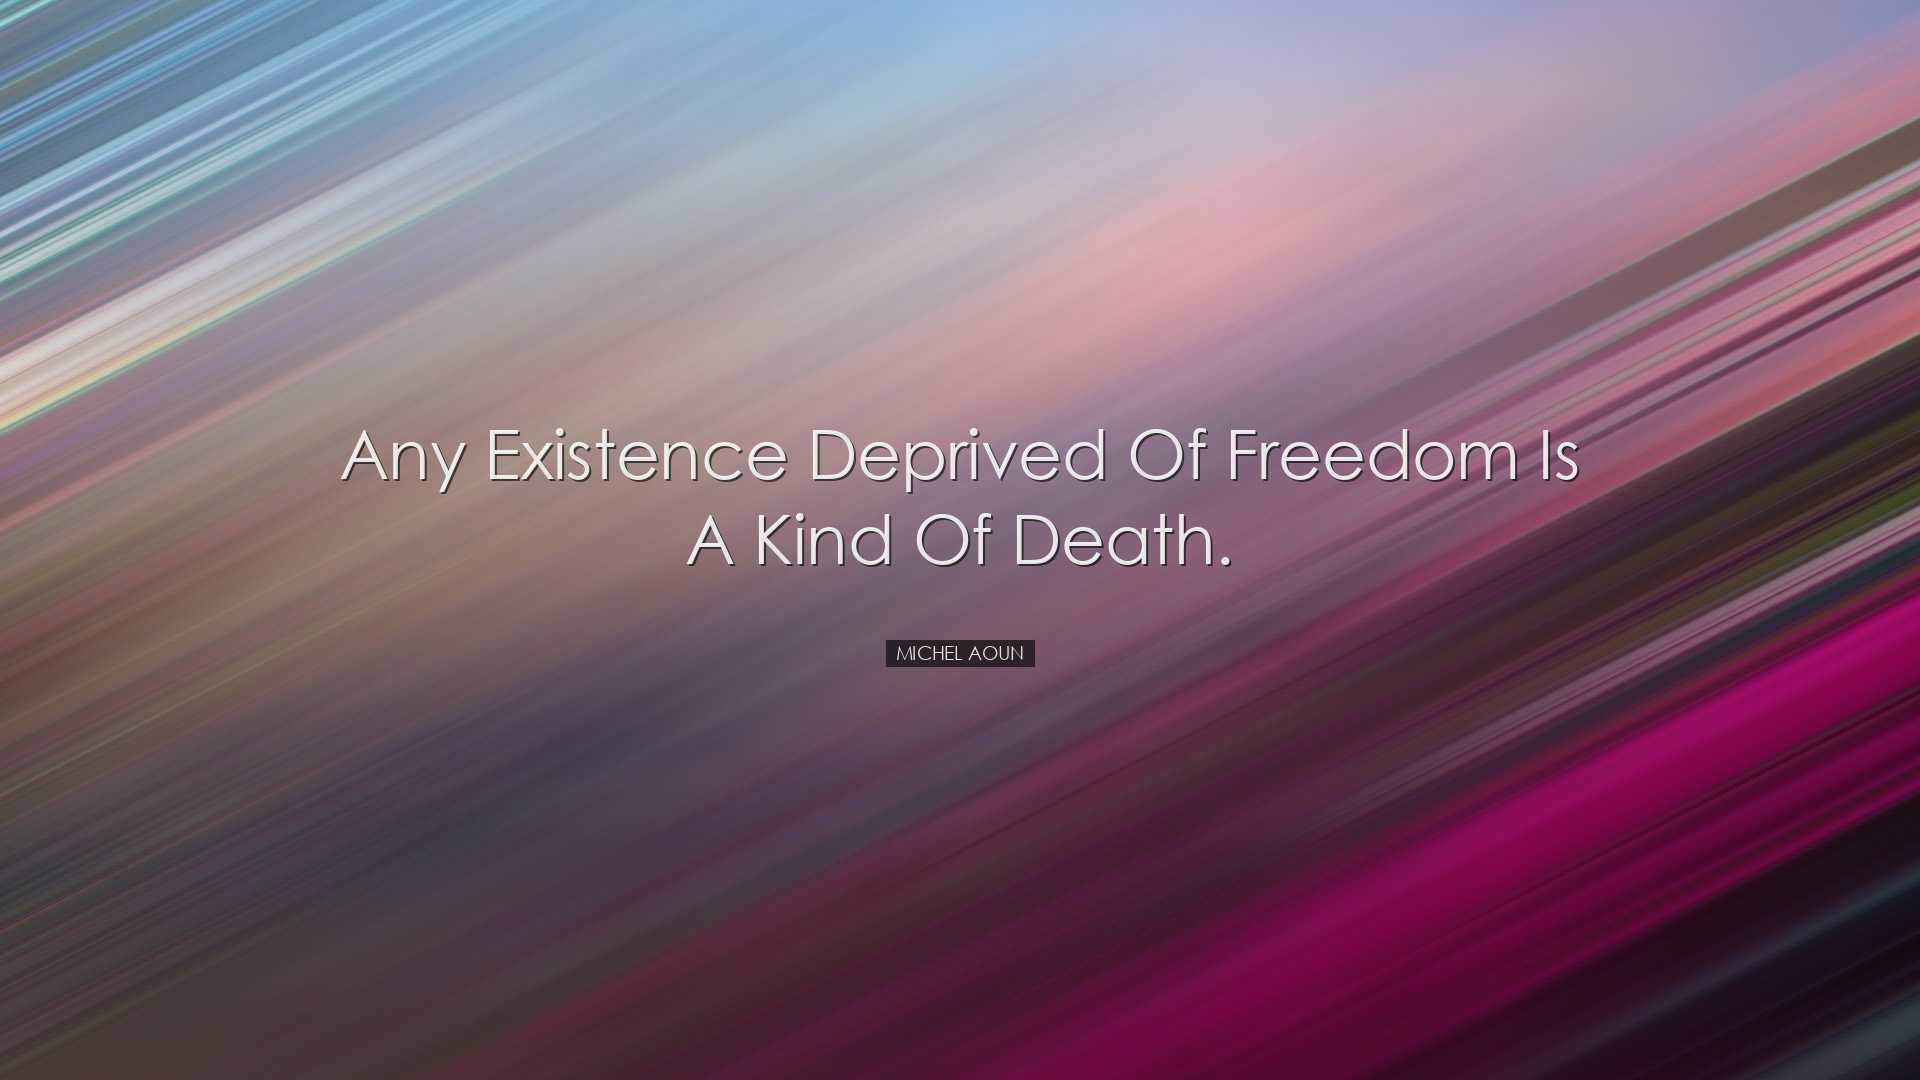 Any existence deprived of freedom is a kind of death. - Michel Aou